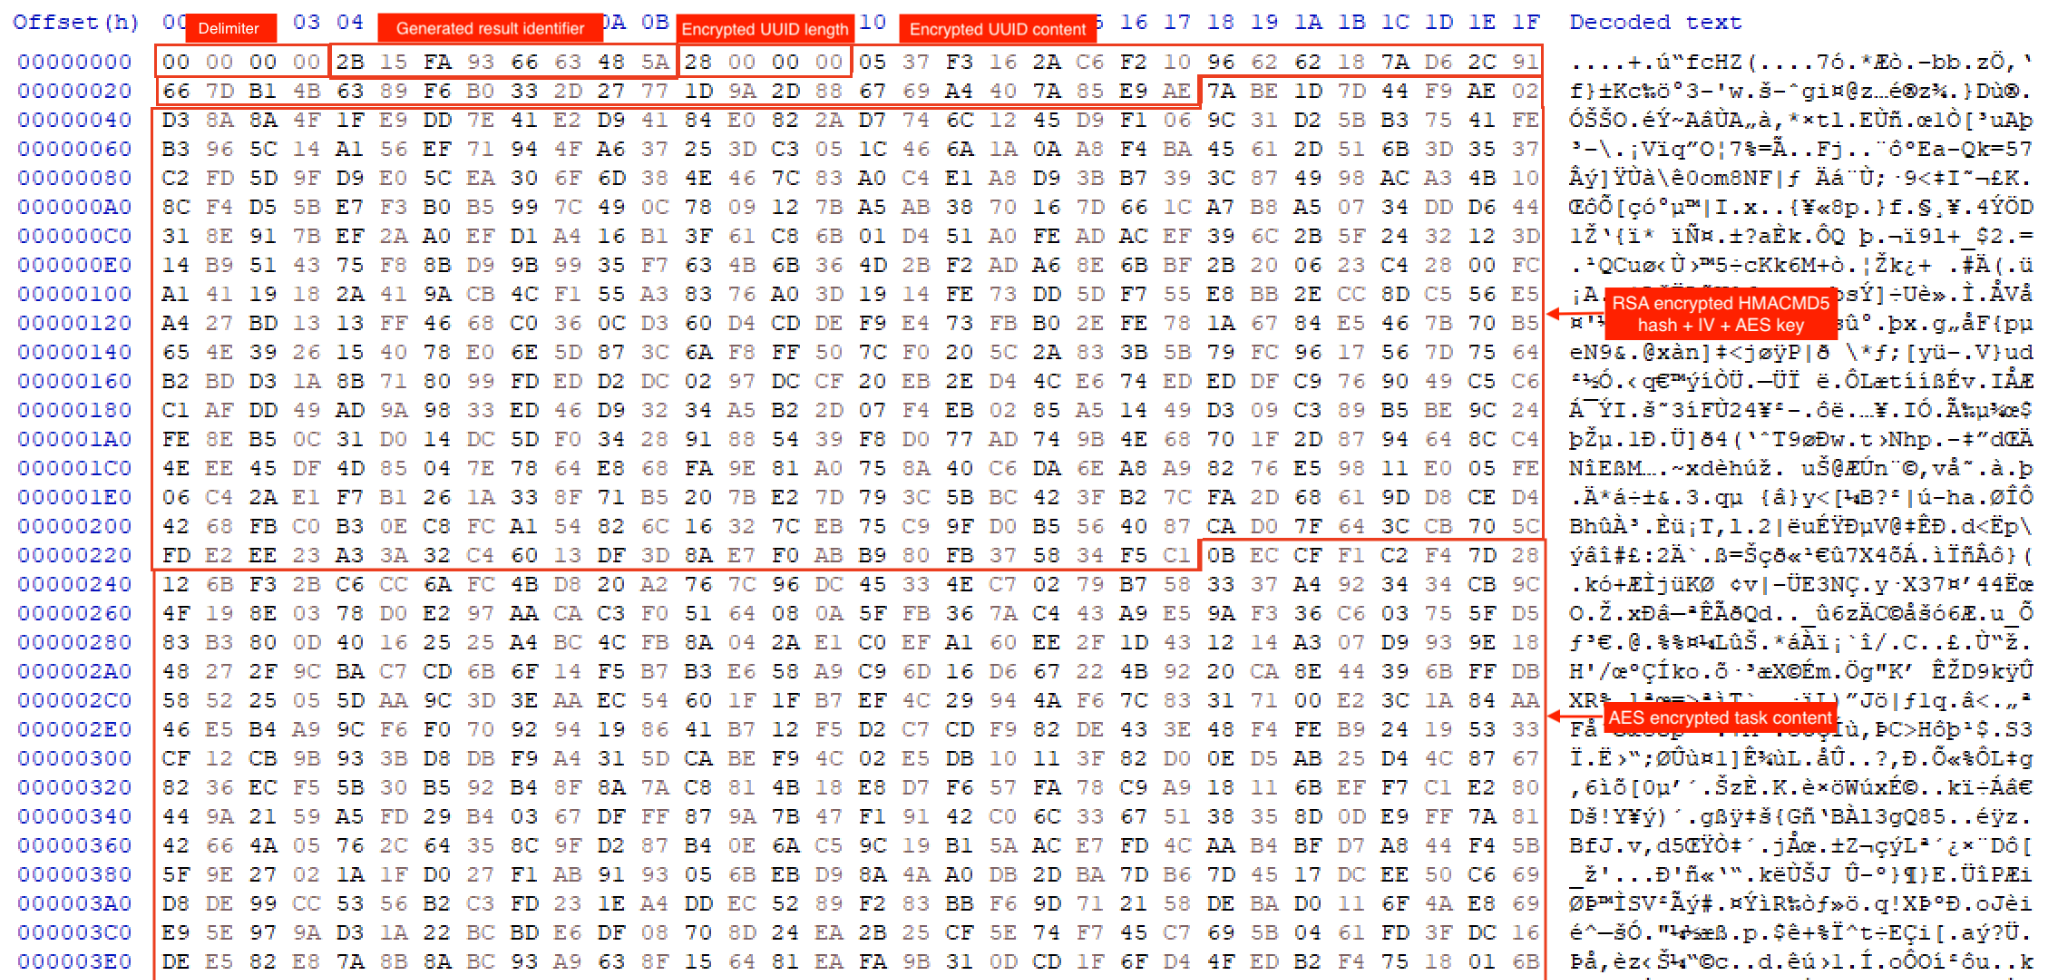 Image 9 is a screenshot of an encrypted result file. Highlighted in red are the Delimiter, generated result identifier, encrypted UUID length, the encrypted GUID content, the RSA encrypted HMACDM5 hash + IV _ AES key and the AES encrypted task content. 